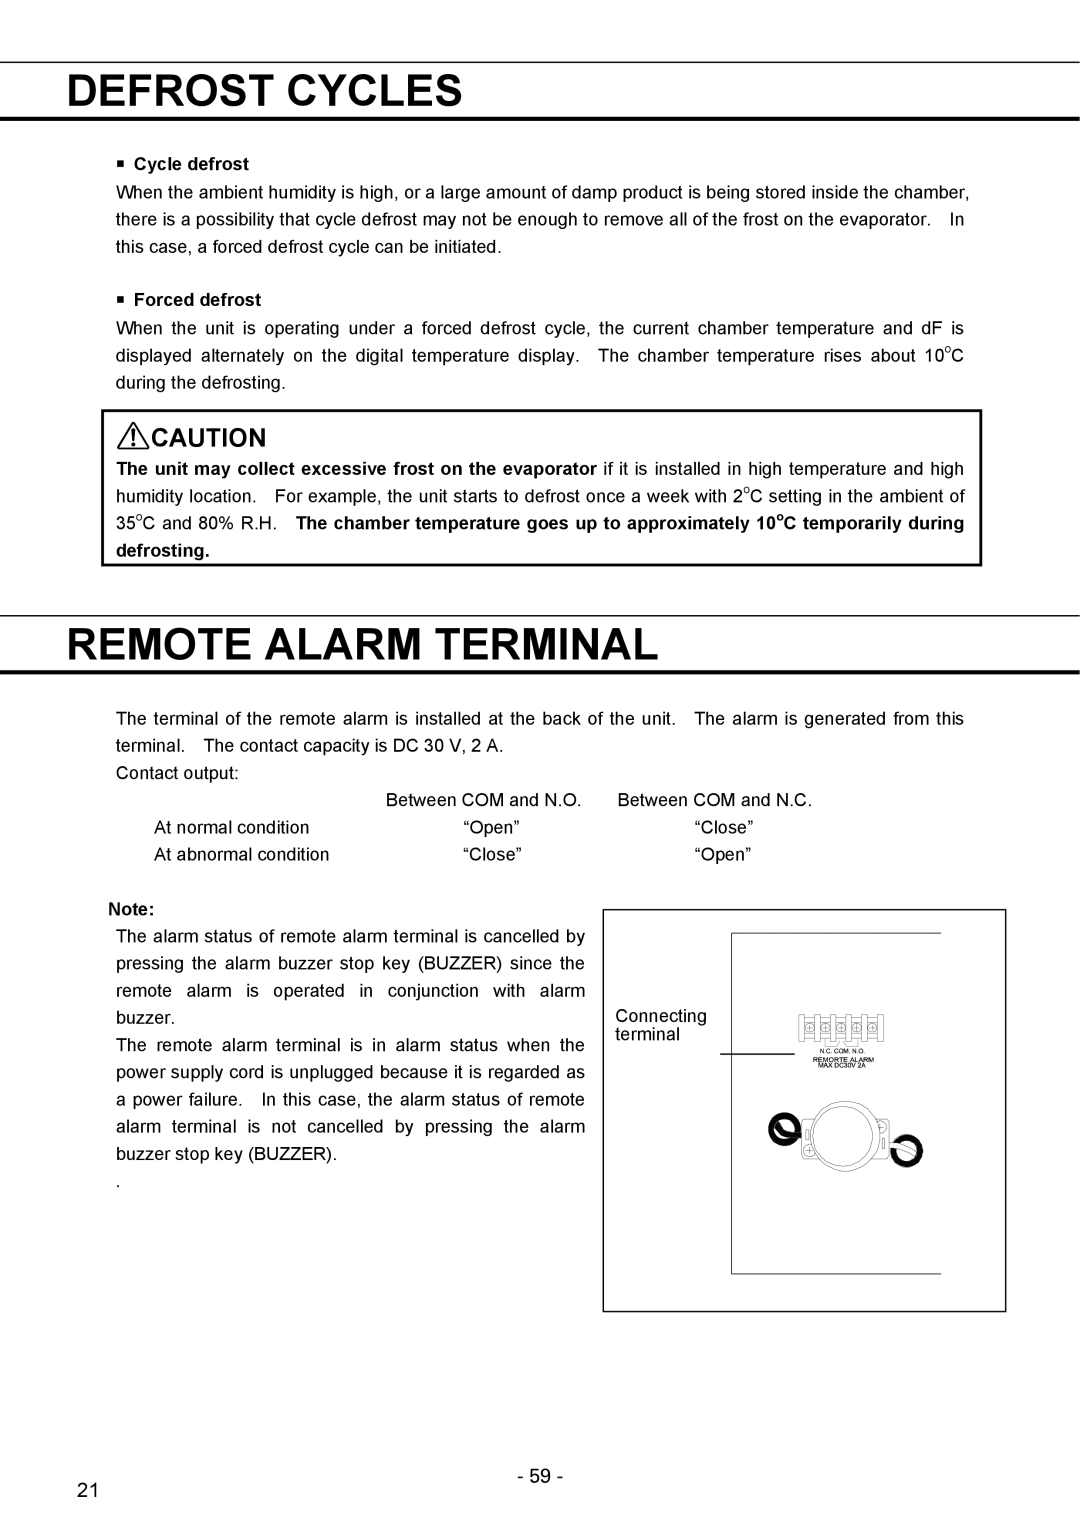 Sanyo MPR-1411R instruction manual Defrost Cycles, Remote Alarm Terminal, 㩵 Cycle defrost, 㩵 Forced defrost, defrosting 